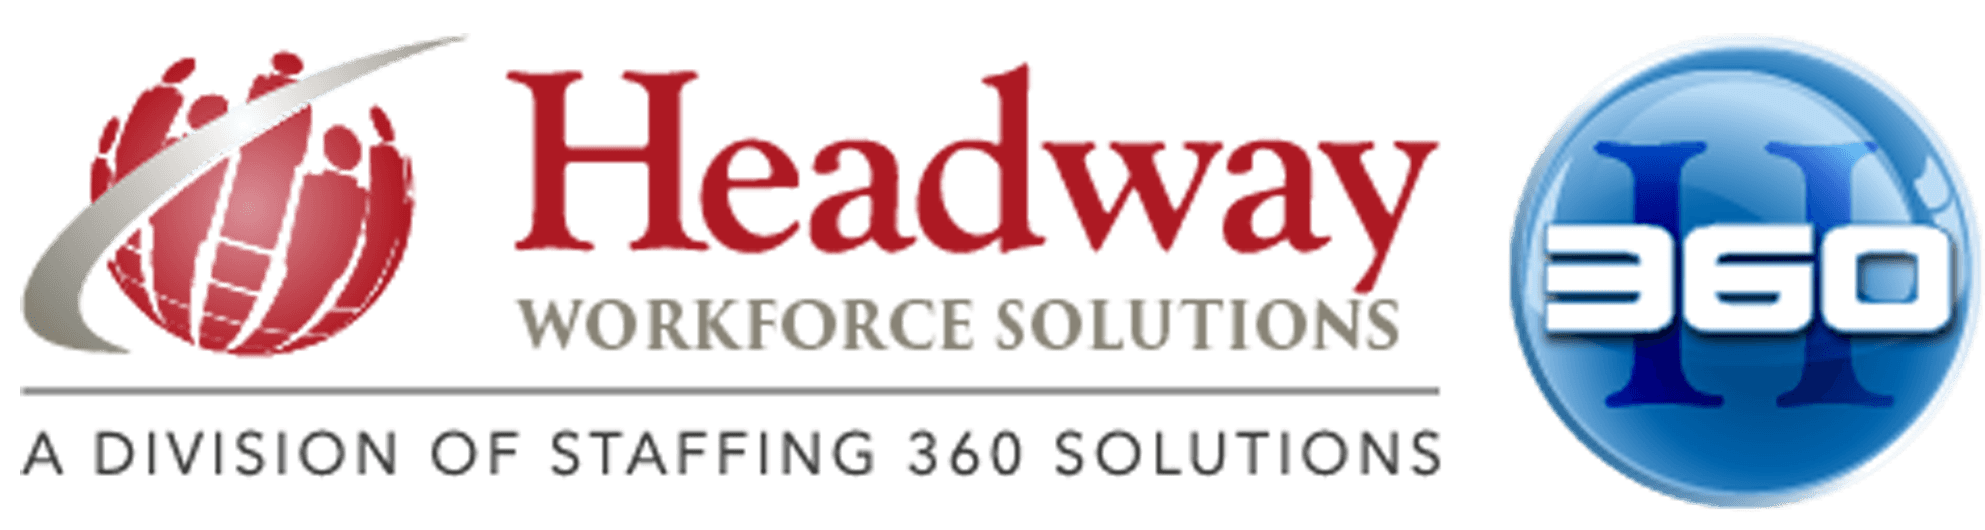 About Headway Workforce Solutions